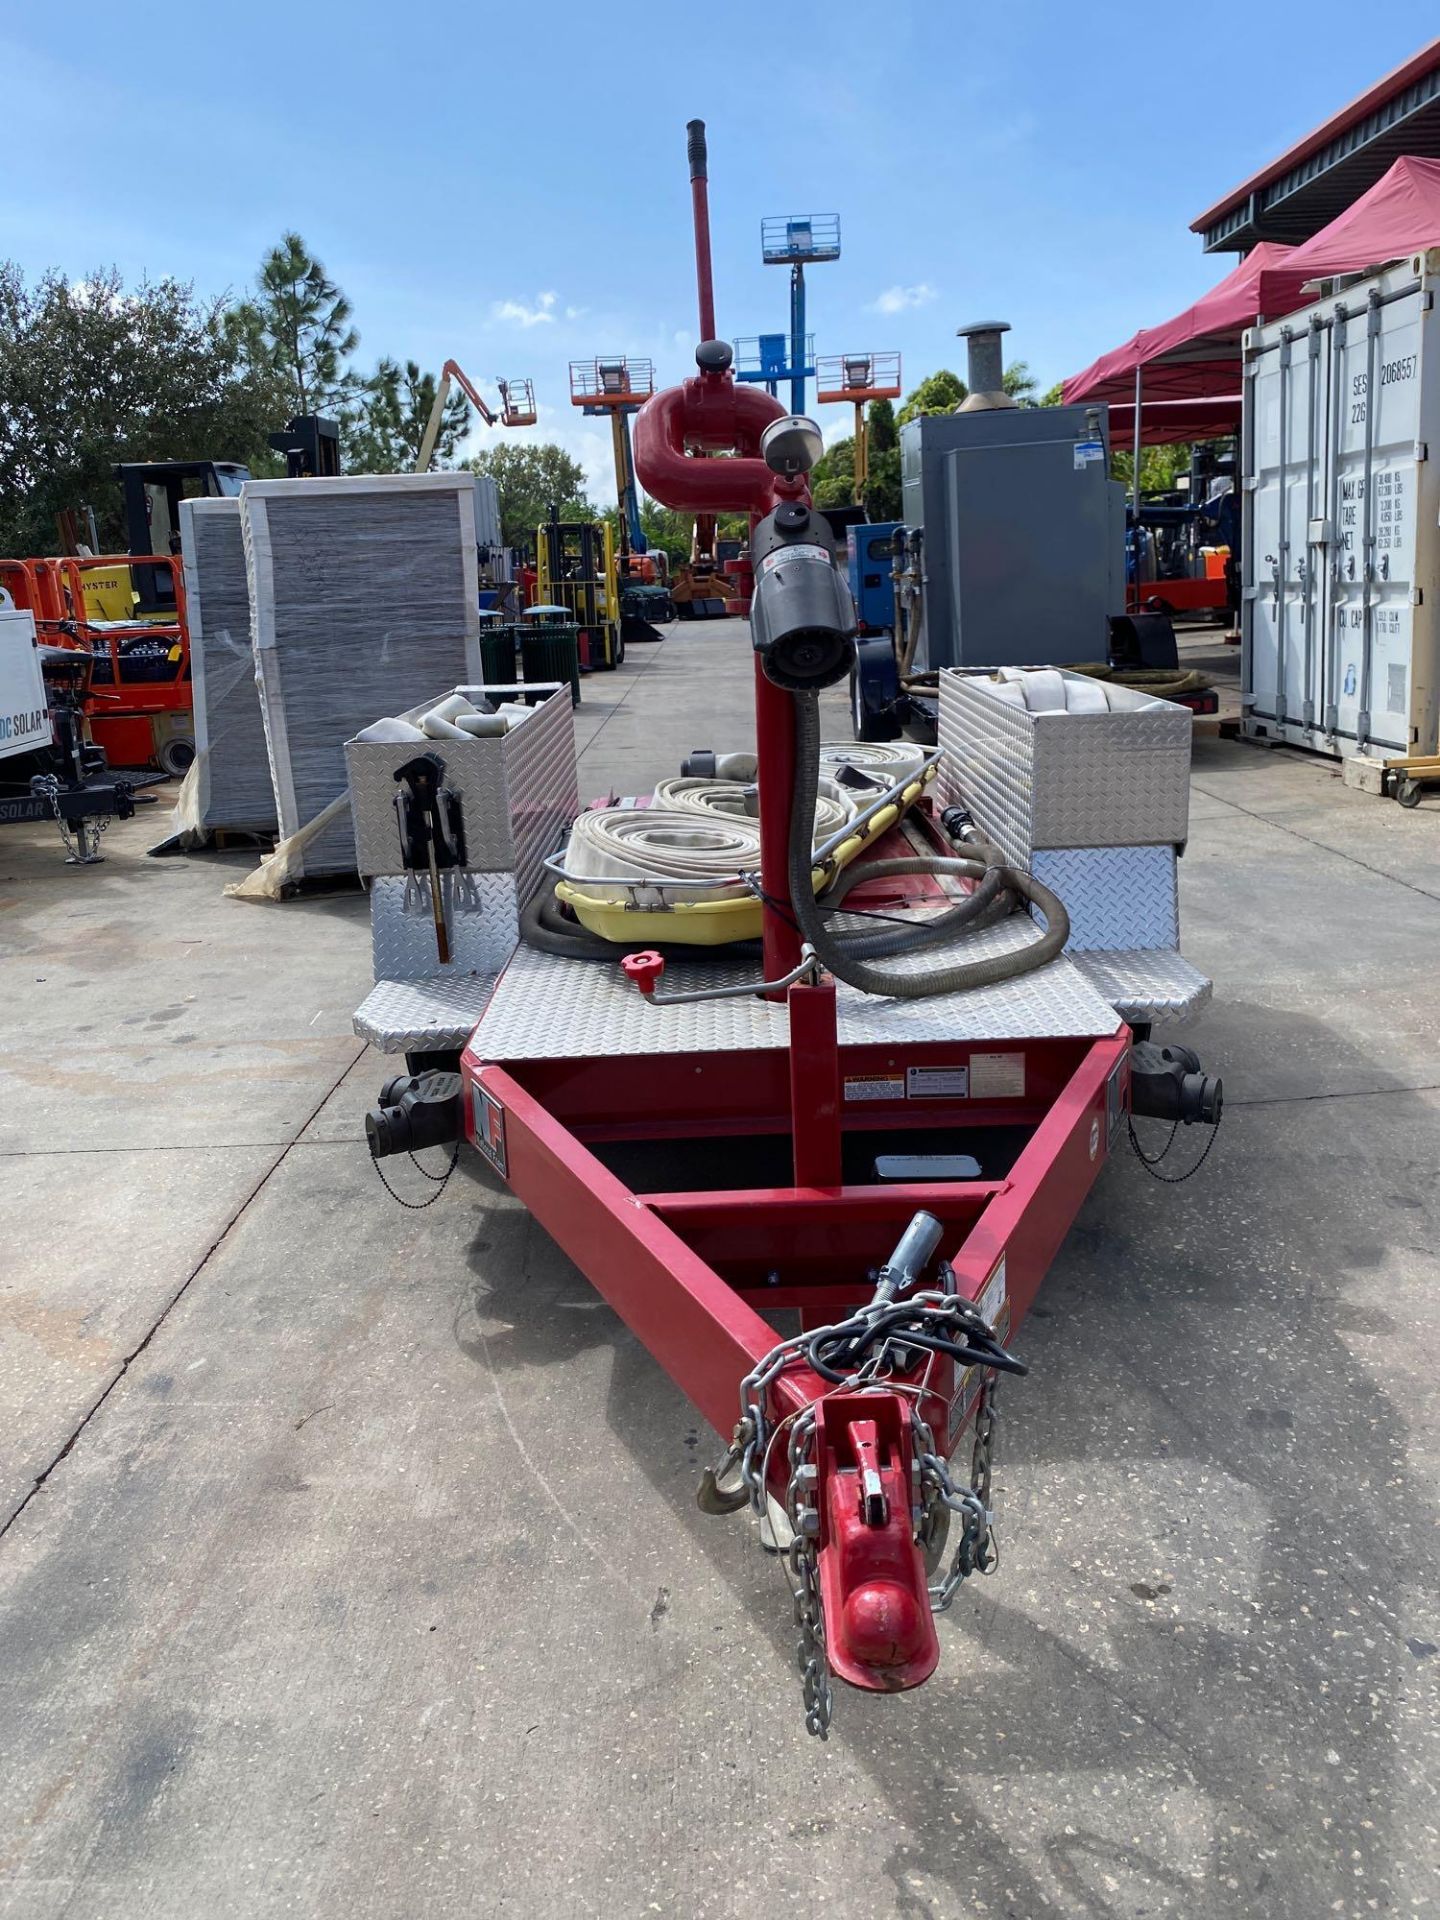 MGS INC. FIRE SUPPORT TRAILER WITH HOSES, STRETCHER, NATIONAL FOAM NOZZLE/ATTACHMENT - Image 2 of 14